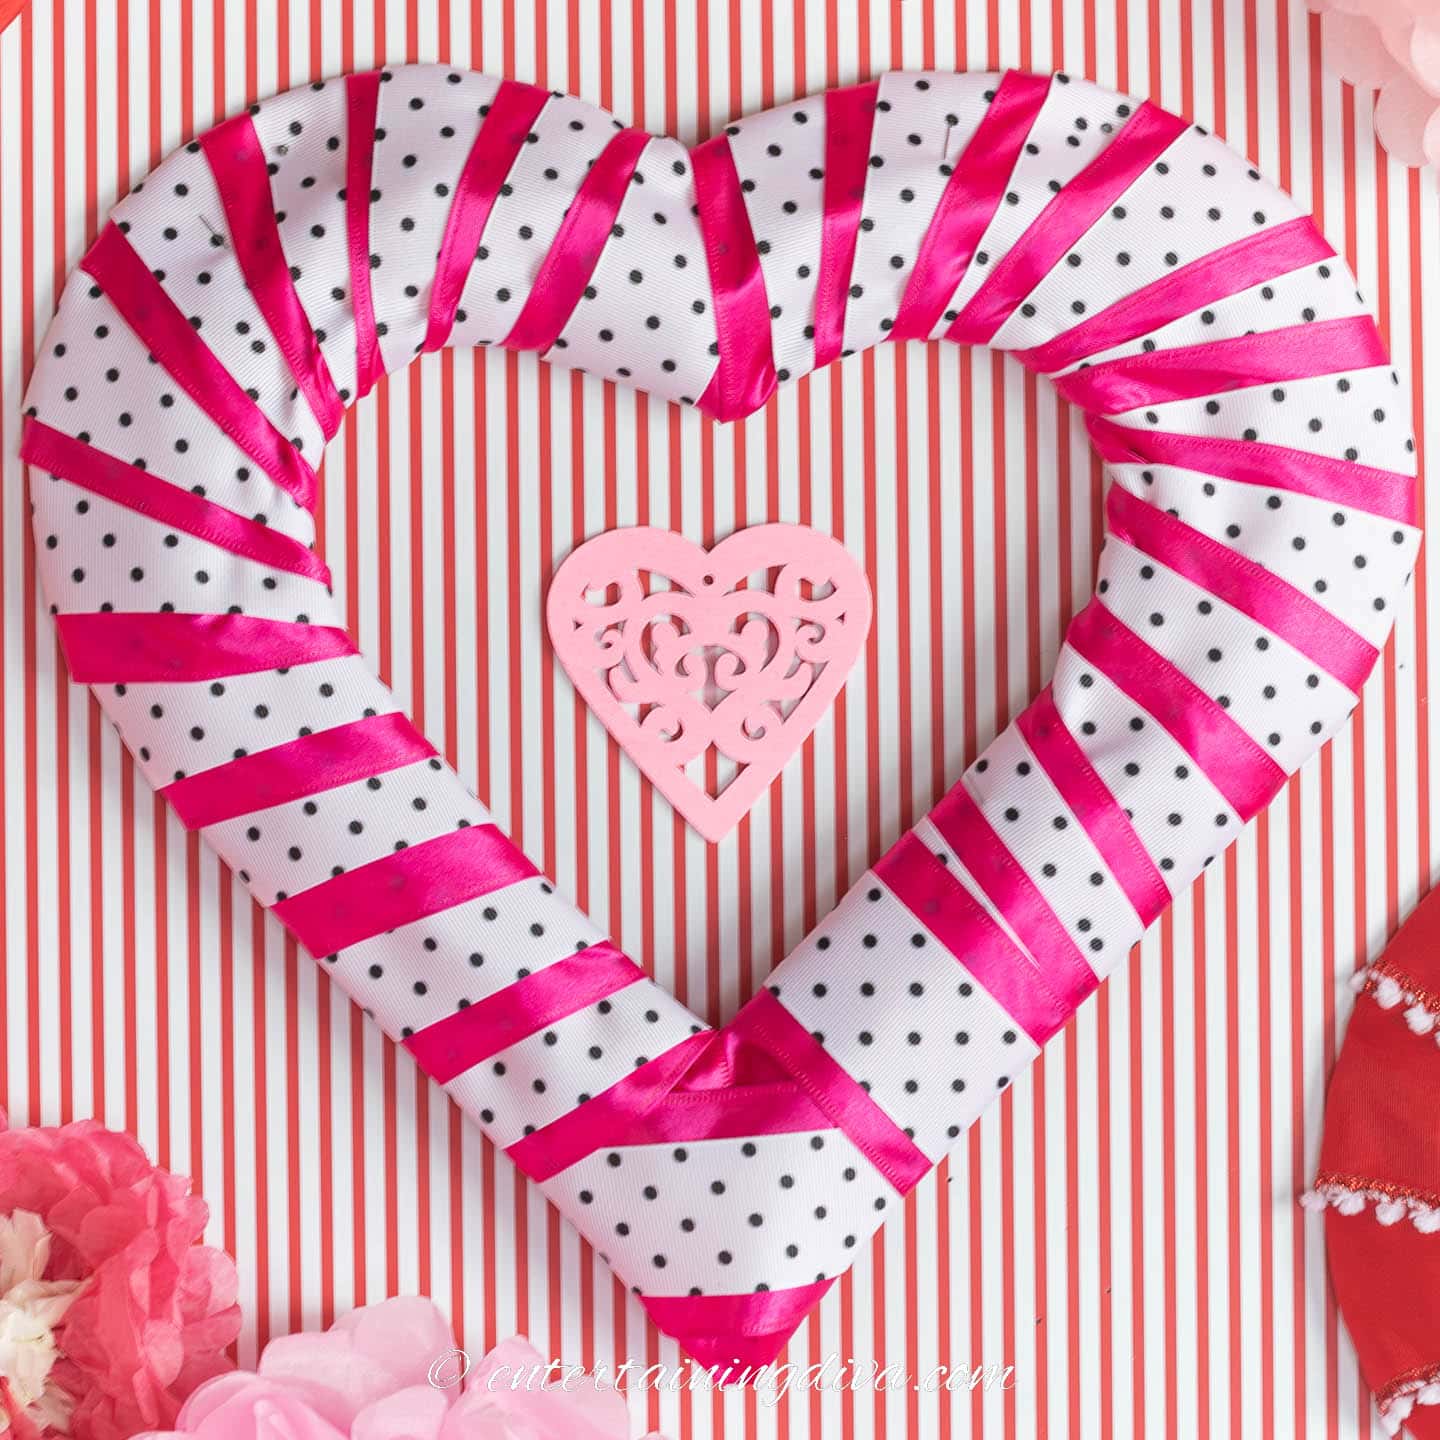 DIY heart wreath made from bright pink ribbon layered with white and black ribbon